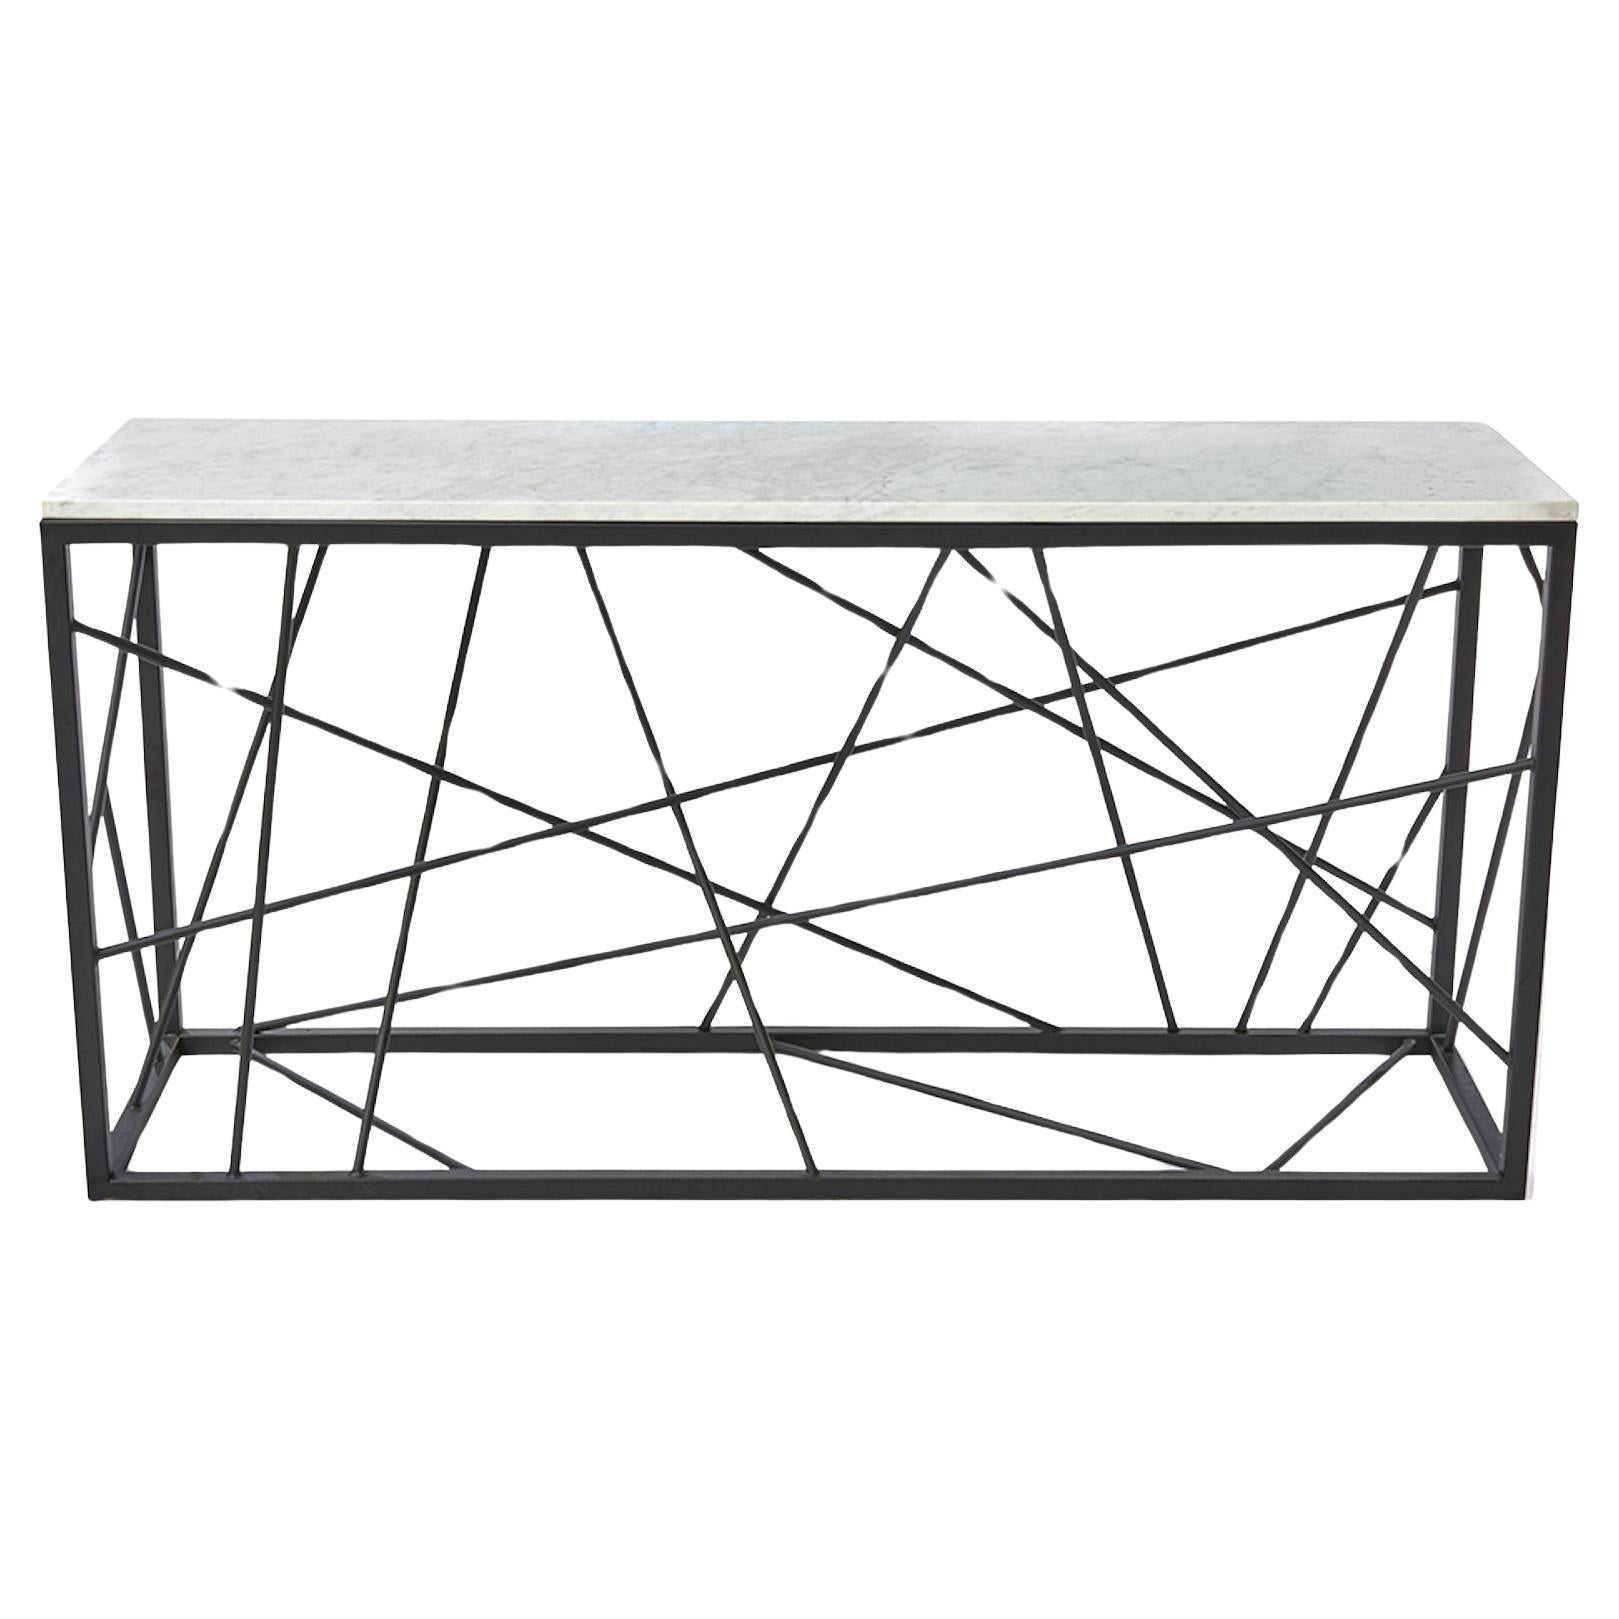 Nest Console by Morgan Clayhall, sculptural steel and marble